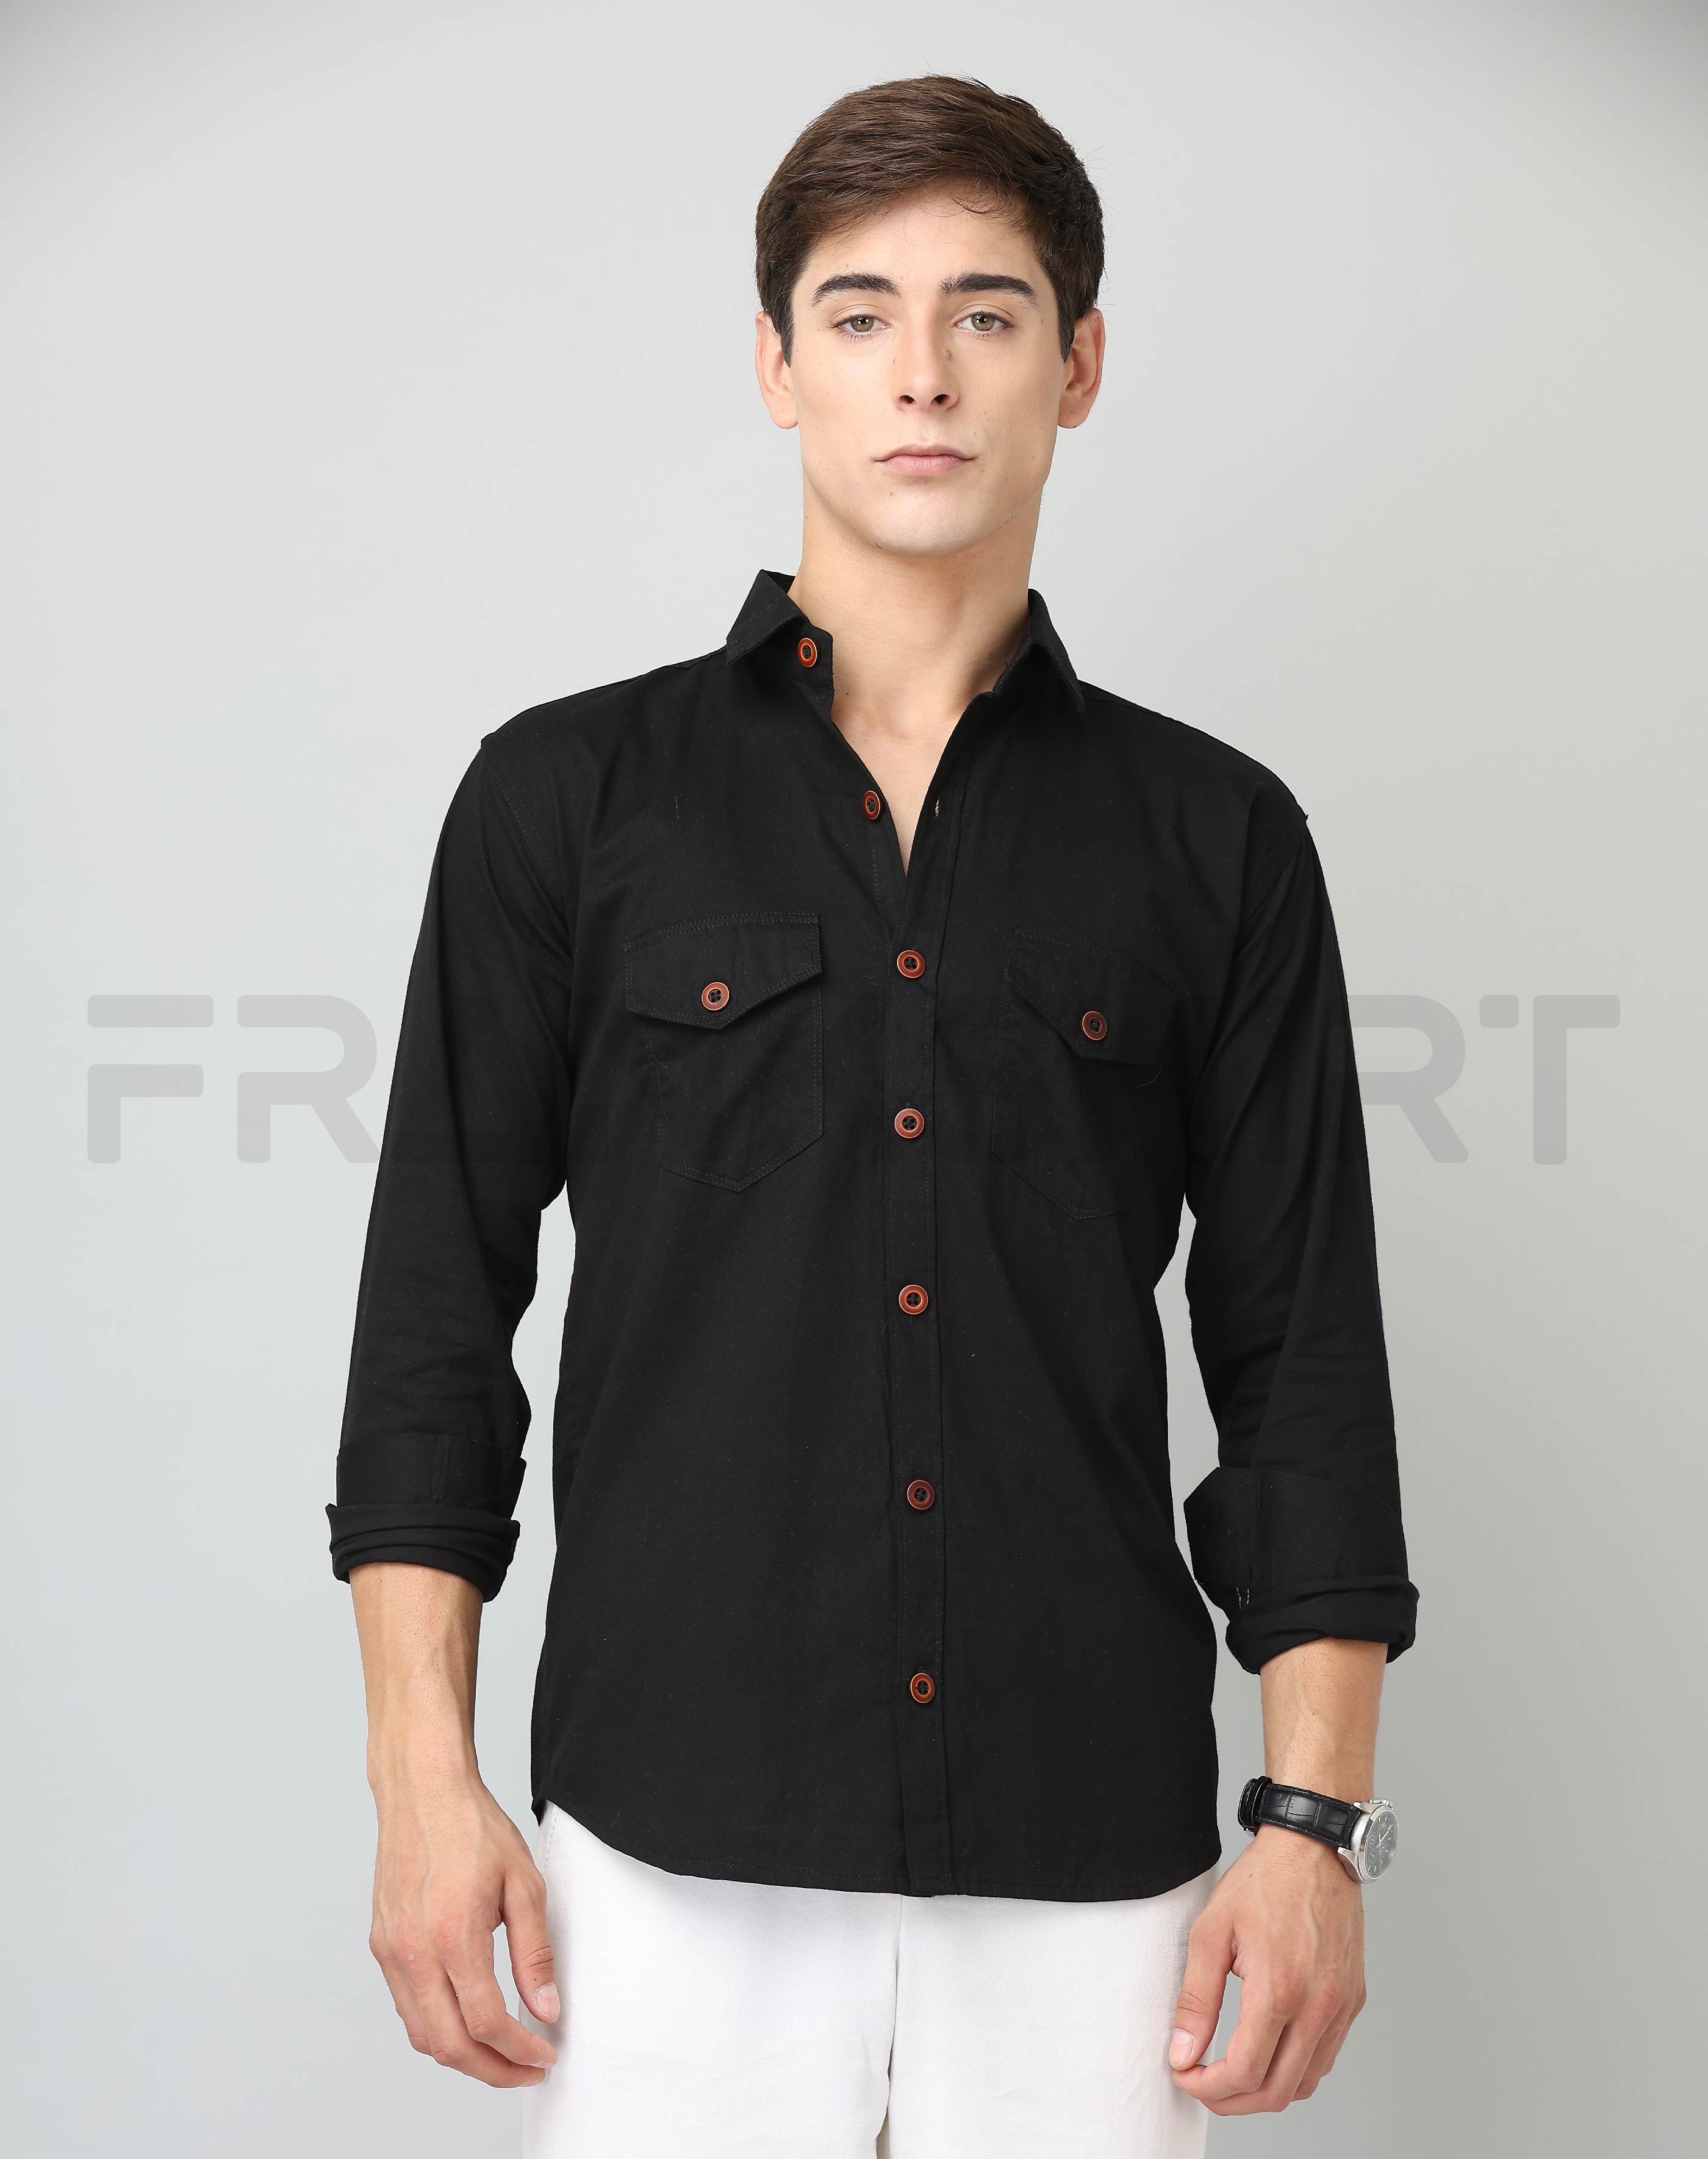 Frankshirt Double Pocket Black Solid Tailored Fit Cotton Casual Shirt for Man